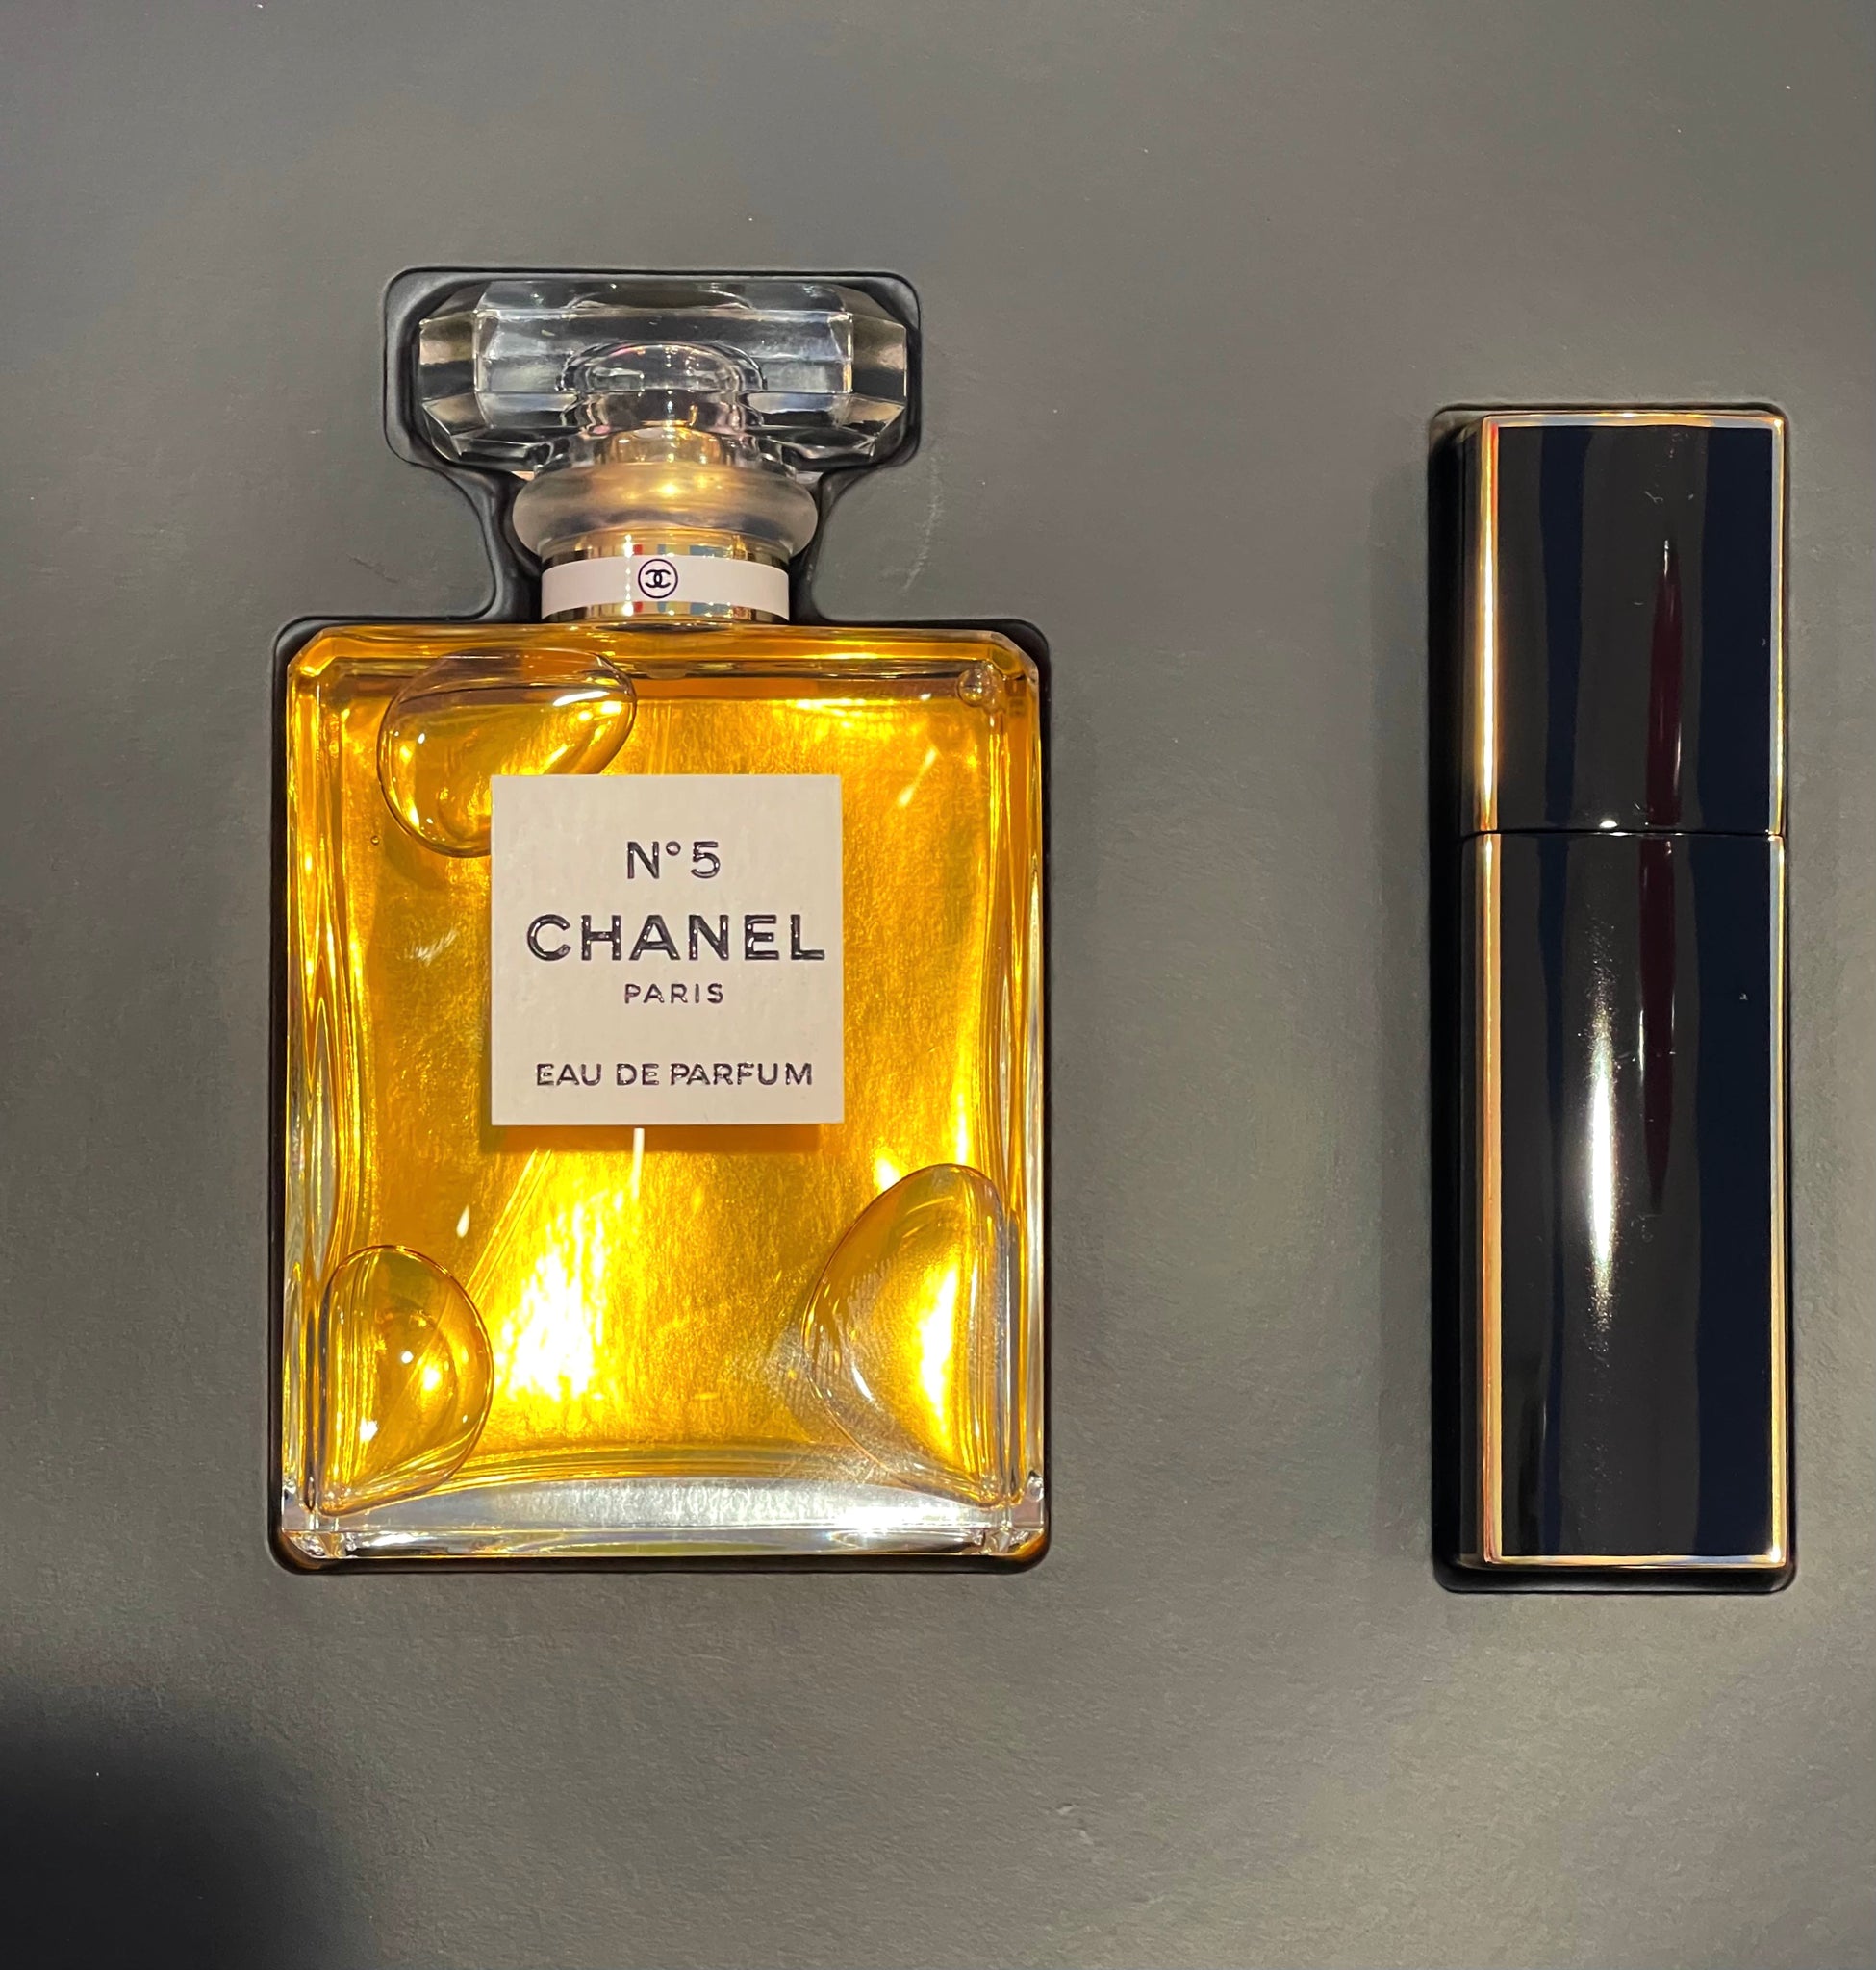 chanel 5 floral